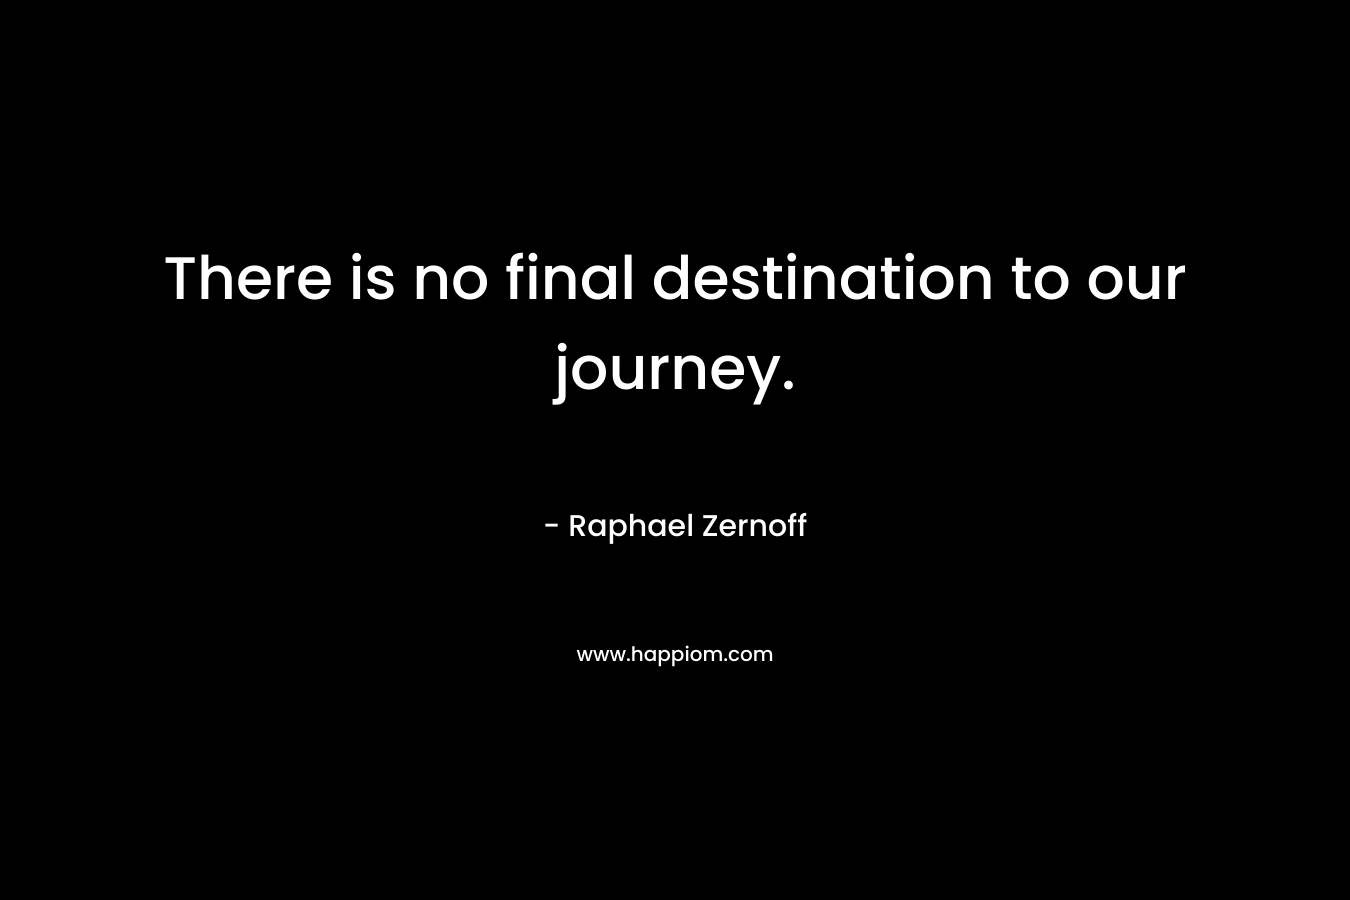 There is no final destination to our journey.